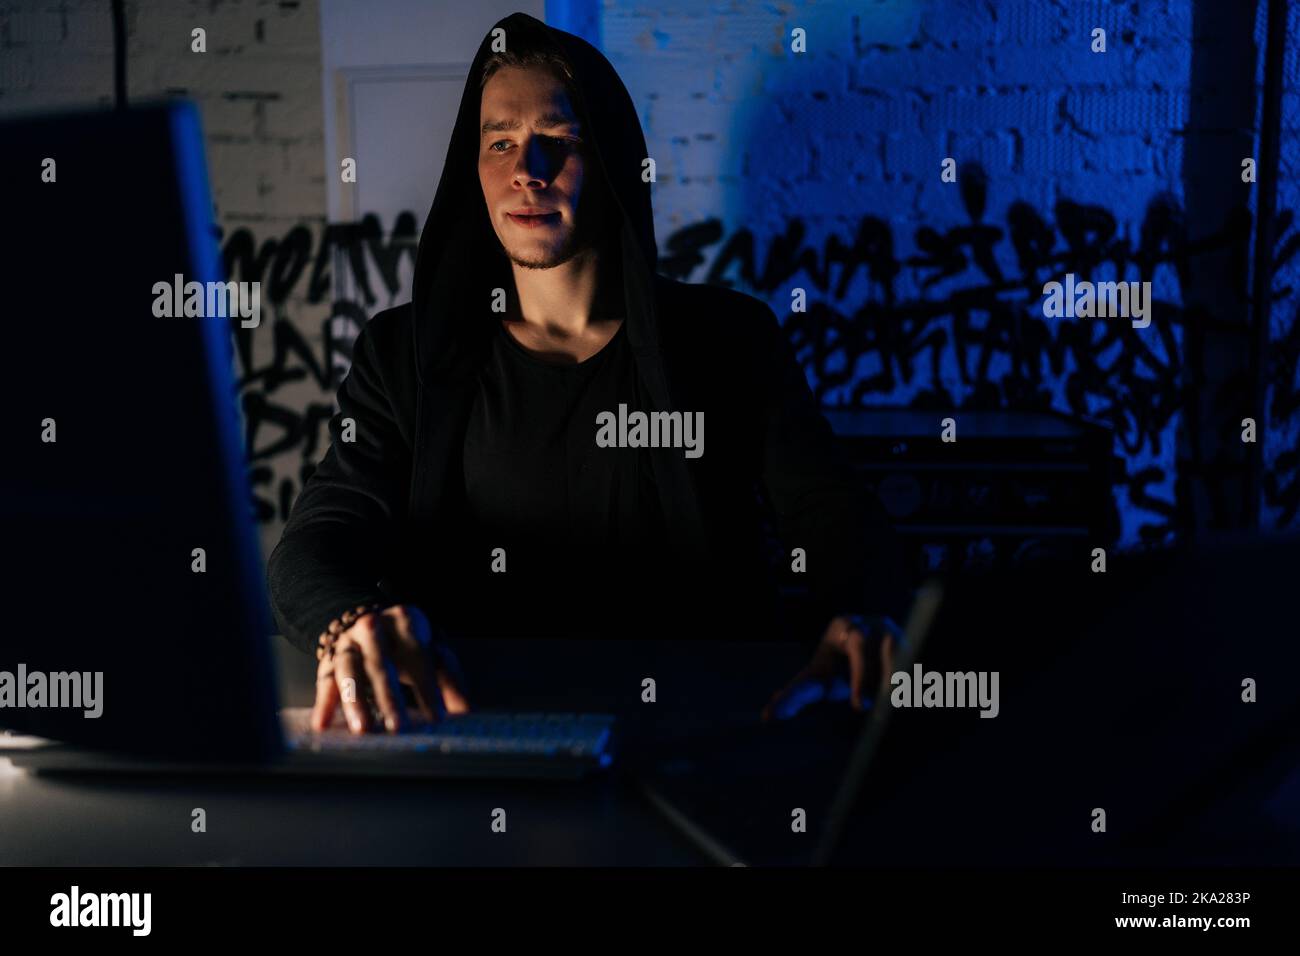 Portrait of hidden hacker man wearing sweatshirt with hood engaged in hacking into security systems, sitting in dark basement room with blue neon Stock Photo